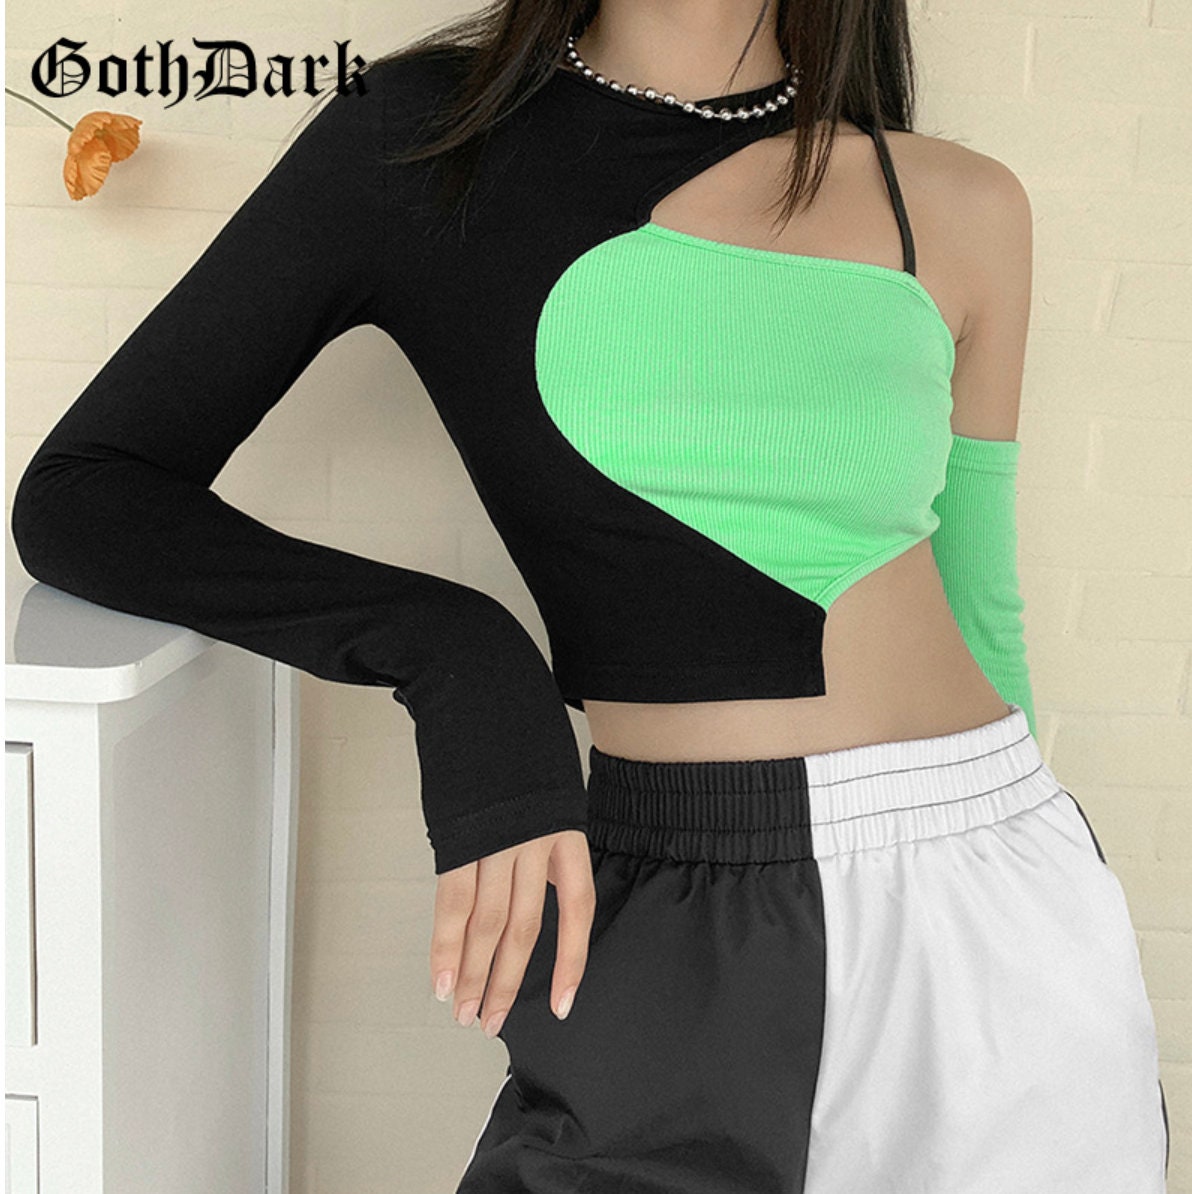 Gothic greeen balck Goth Dark Y2k Punk Patchwork E-girl Style T-shirts Gothic Color Hip Hop Hollow Out Backless Top Techwear Streetwear # 261